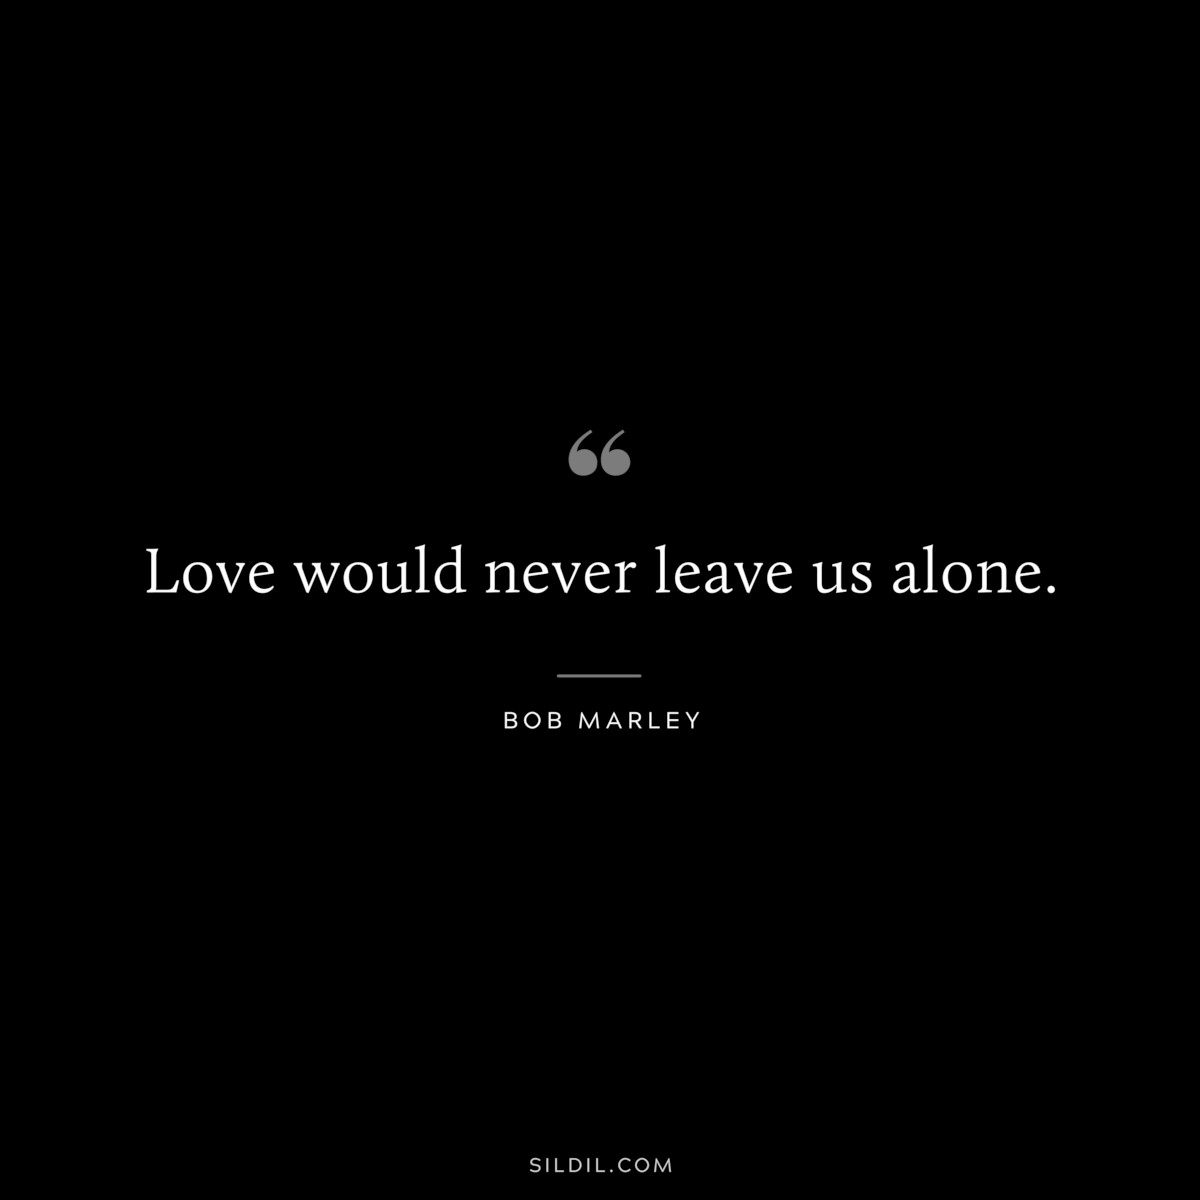 Love would never leave us alone. ― Bob Marley